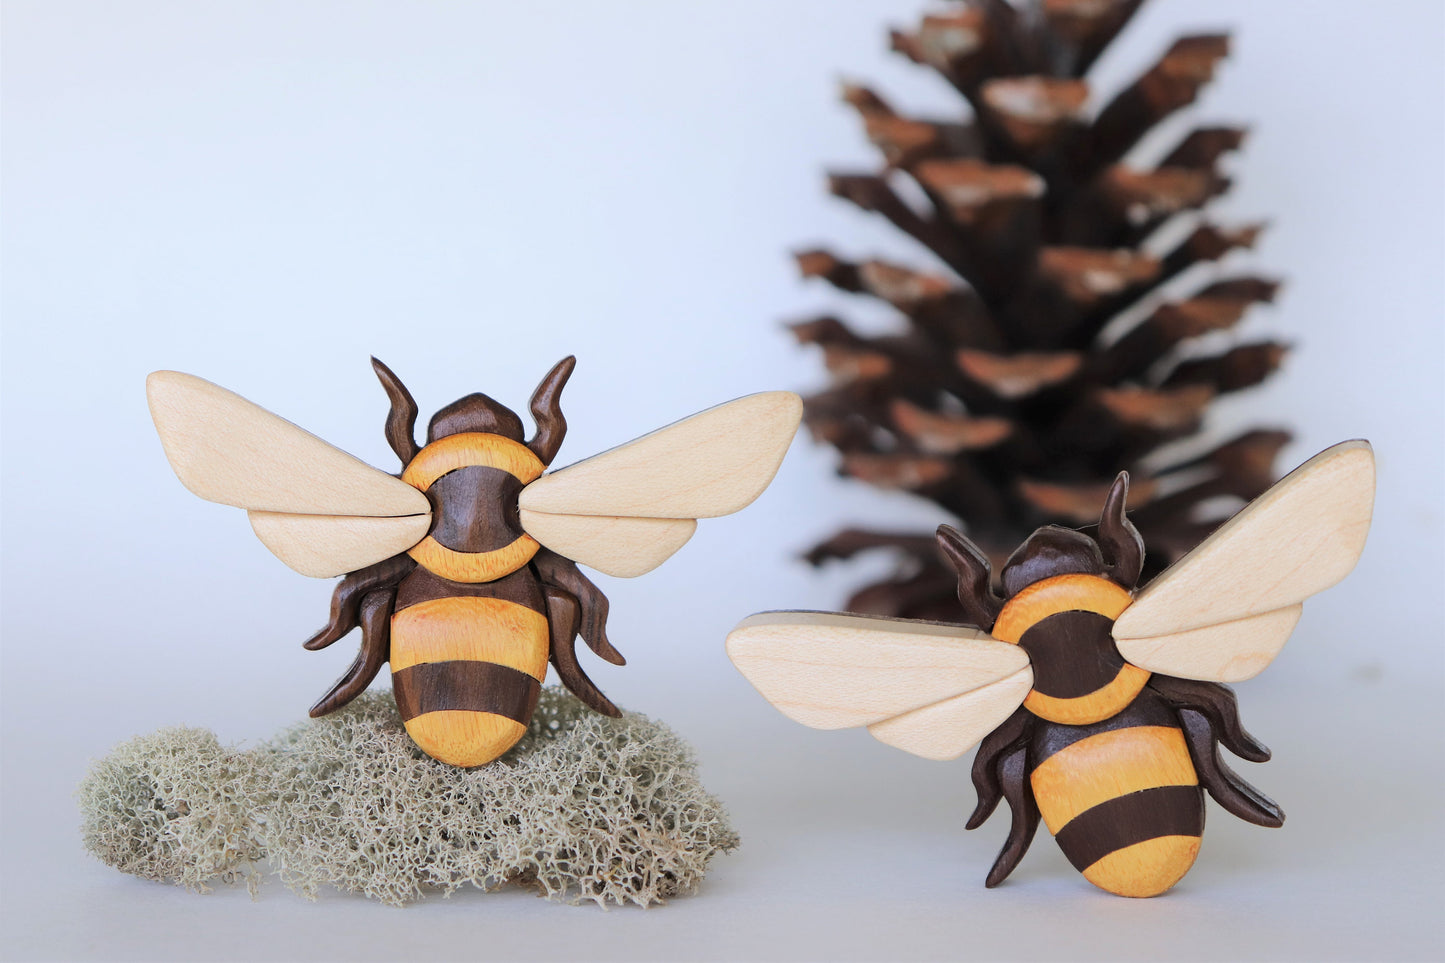 Bumble Bee Magnet / Ornament